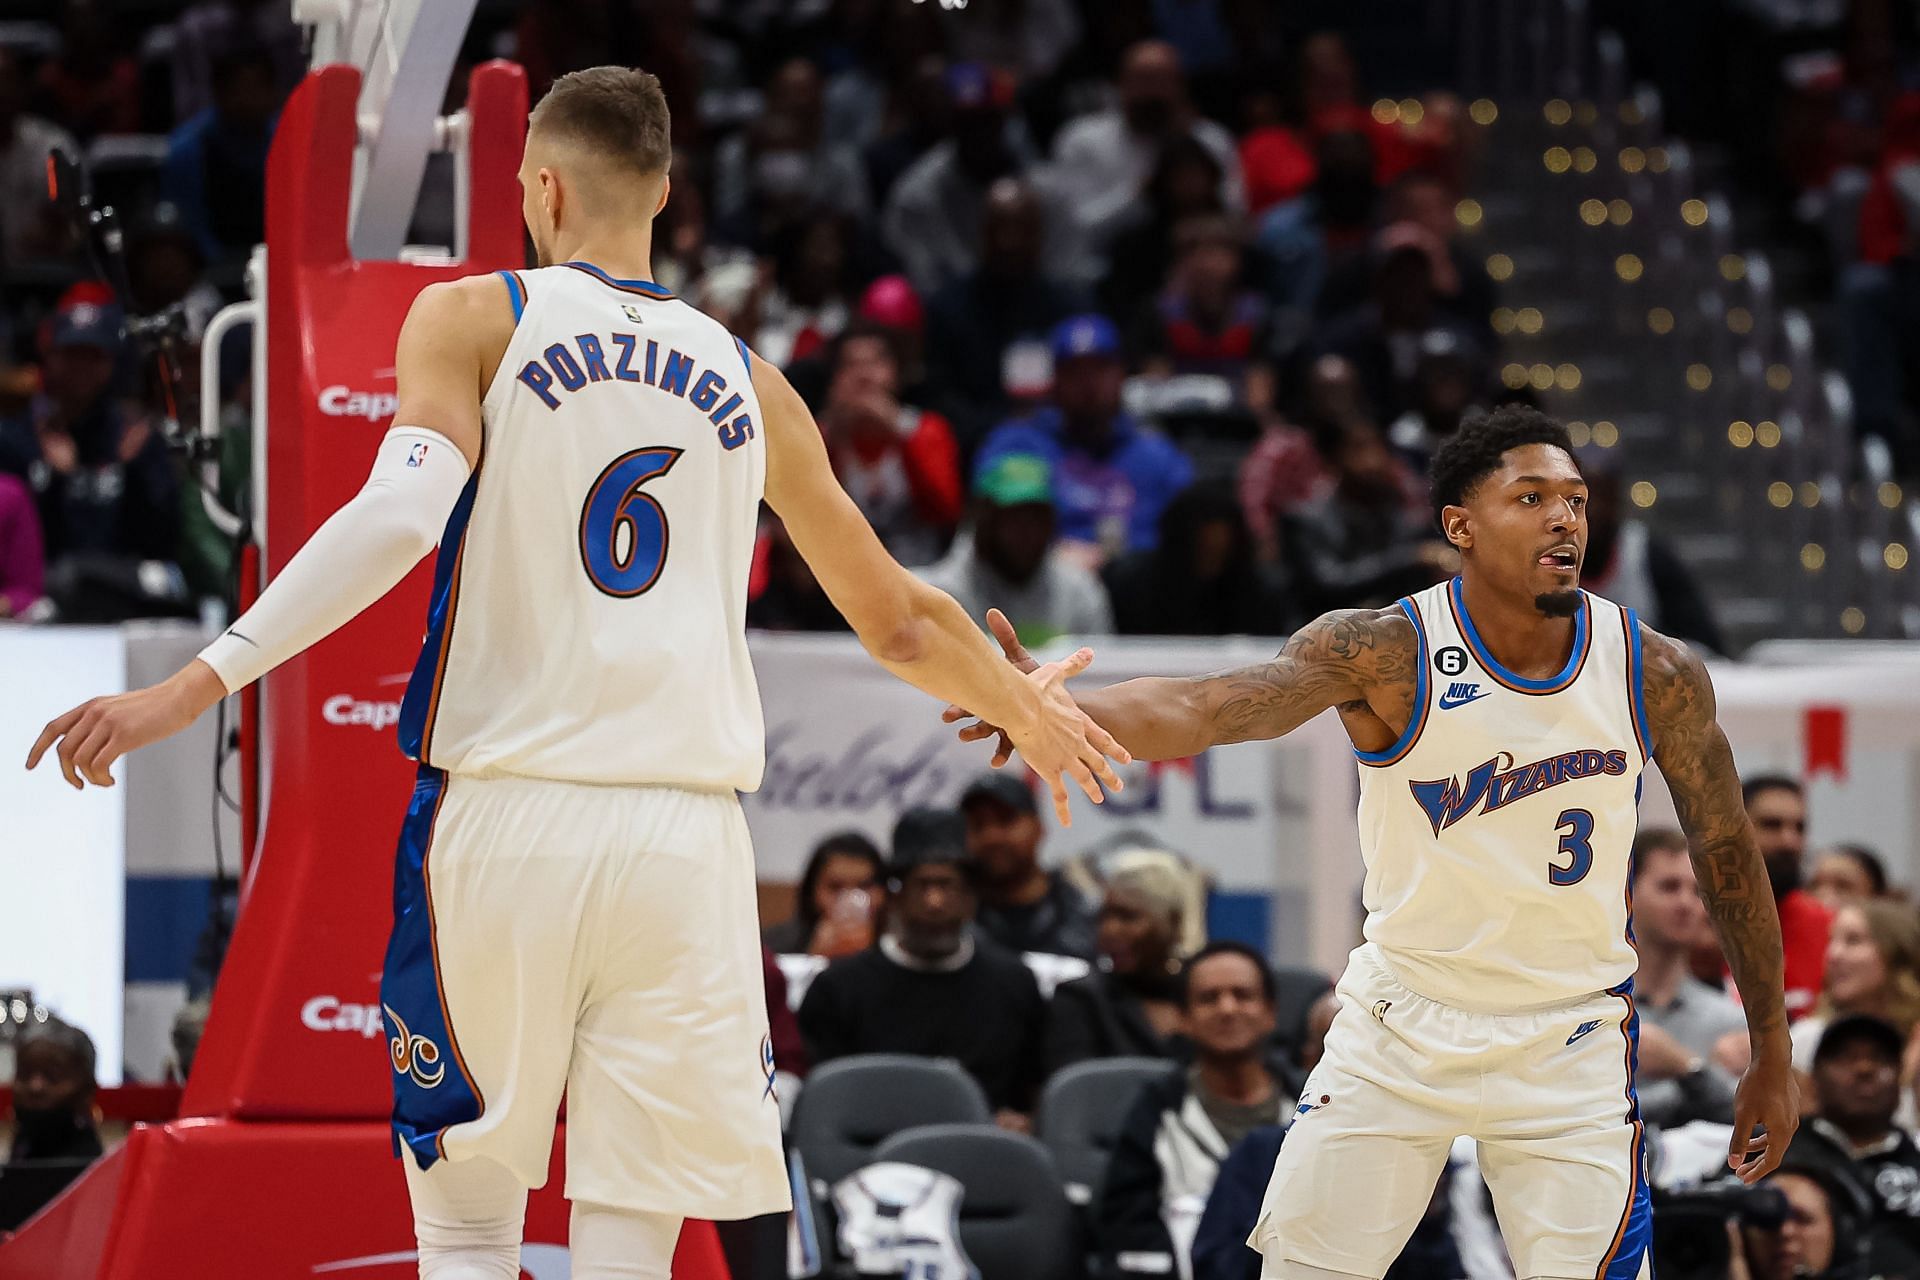 “The Wizards might have a big 3” — Brian Windhorst speculates Washington Wizards ‘Big 3’ as a reason for Bradley Beal’s commitment to the team